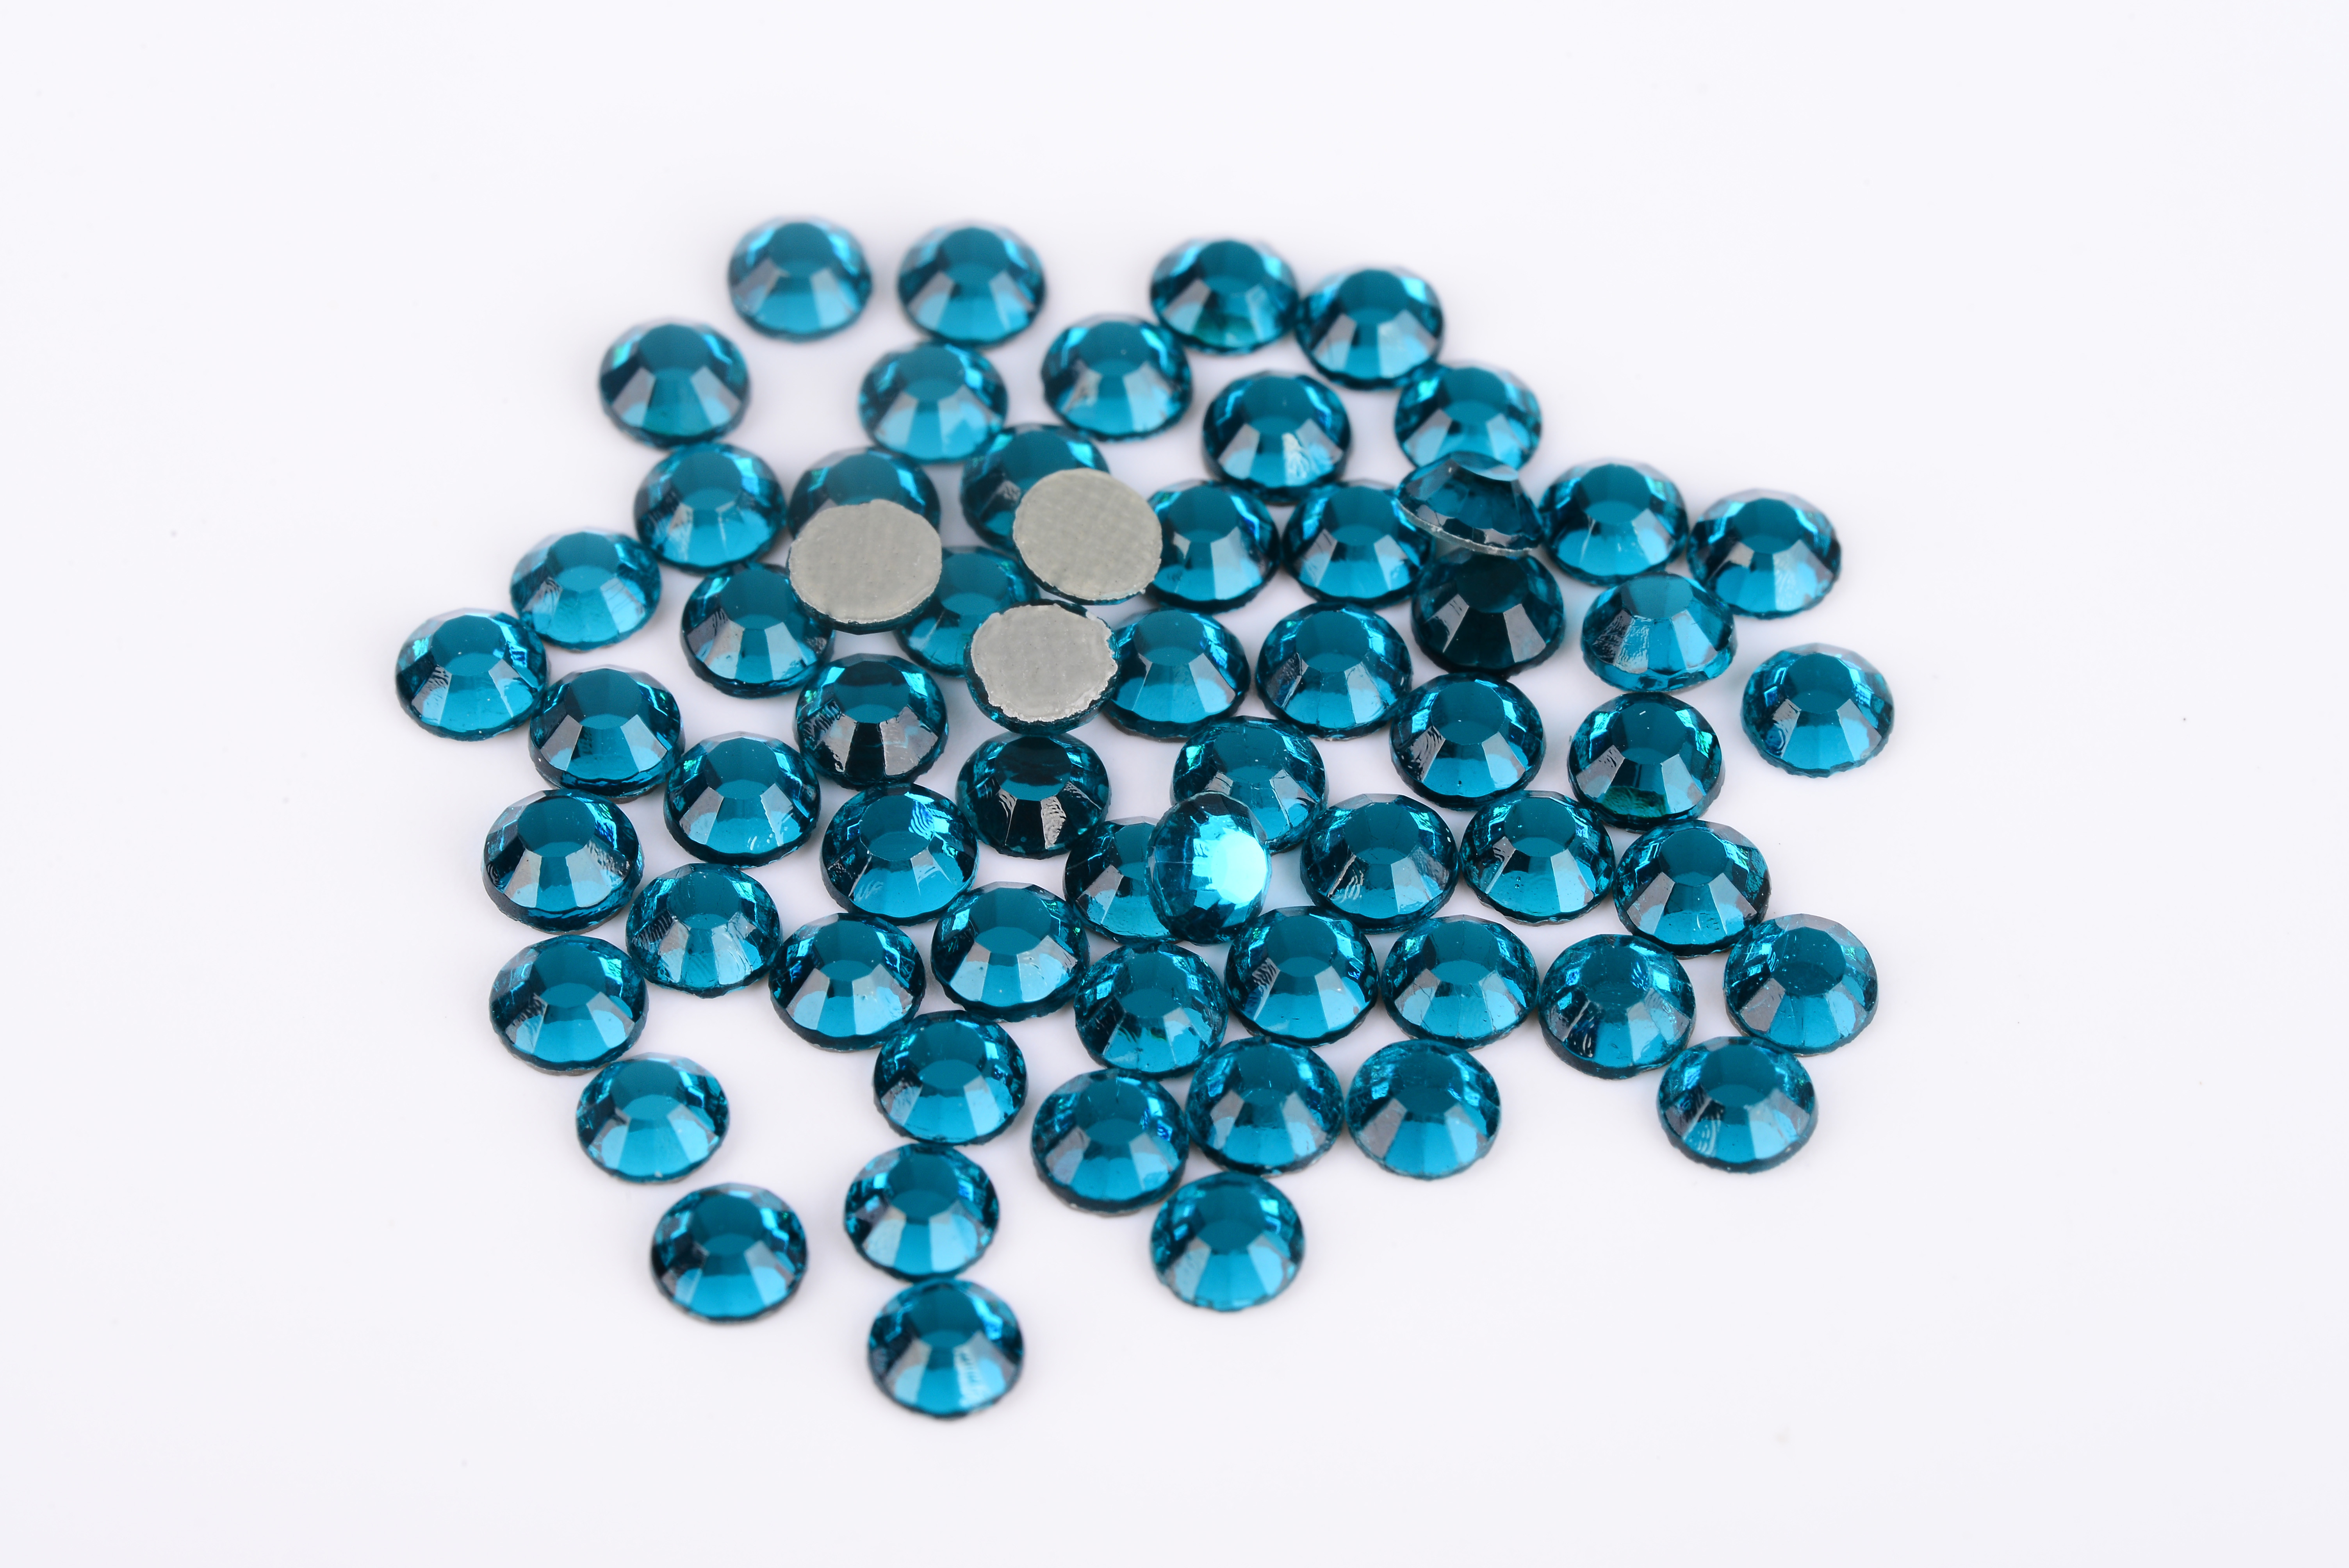  Lead Free Hotfix Crystal Rhinestones High Color Accuracy Wear Resistance Manufactures